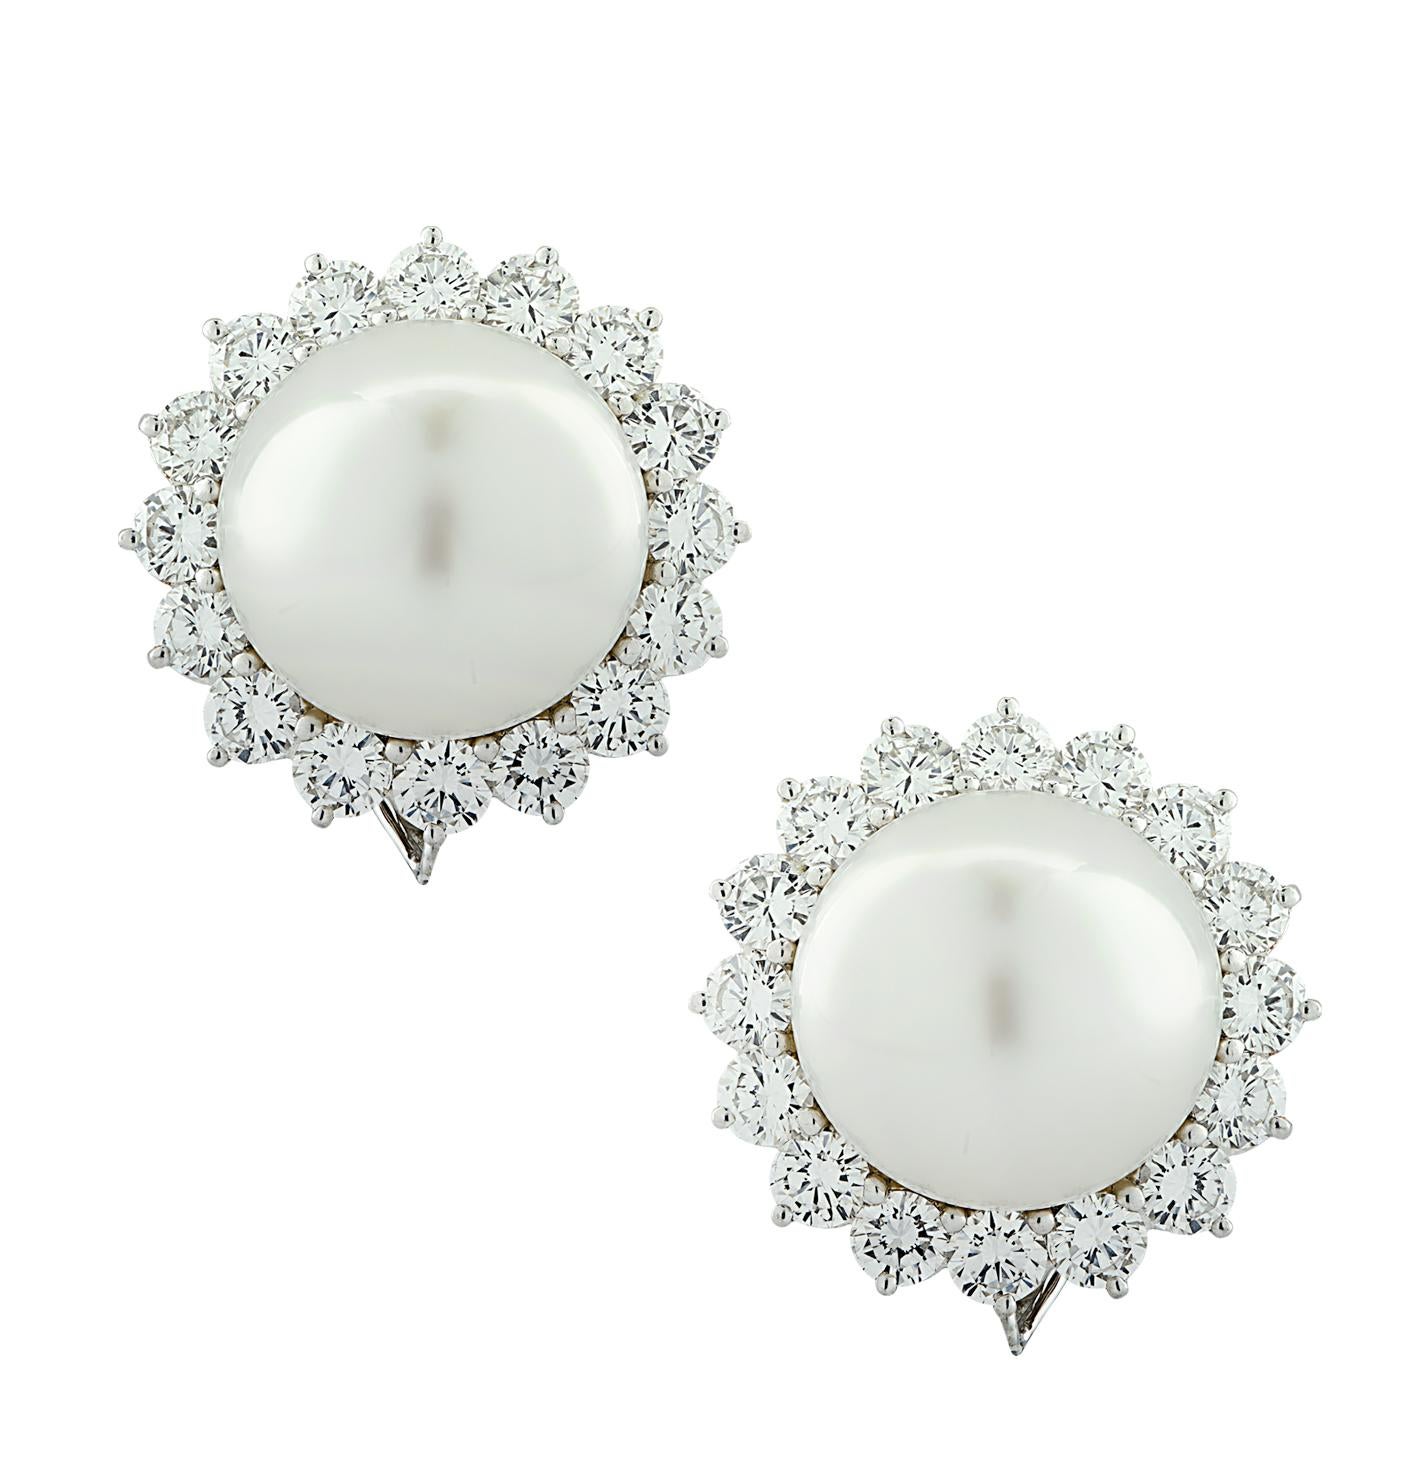 Beautiful diamond and pearl stud earrings crafted in platinum, showcasing two 15.5 mm South Sea pearls surrounded by 32 round brilliant cut diamonds weighing approximately 5 carats total F color, VS clarity. These gorgeous earrings measure .9 of an